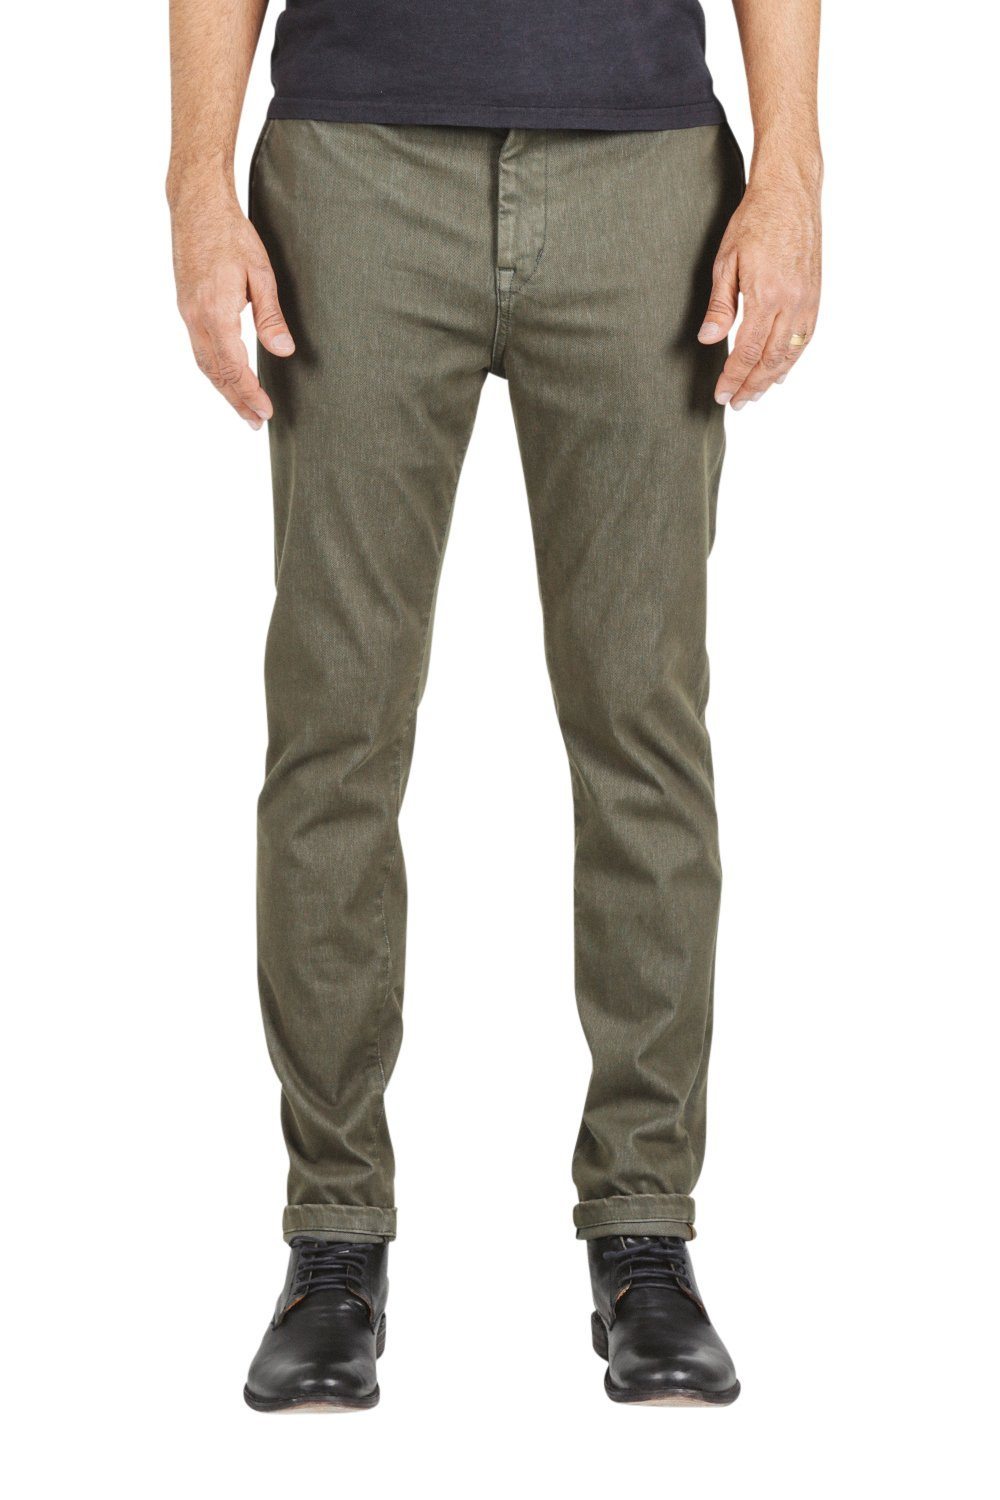 KATO' - The Axe Slim 11oz 4-Way Stretch French Terry - Military Green - City Workshop Men's Supply Co.